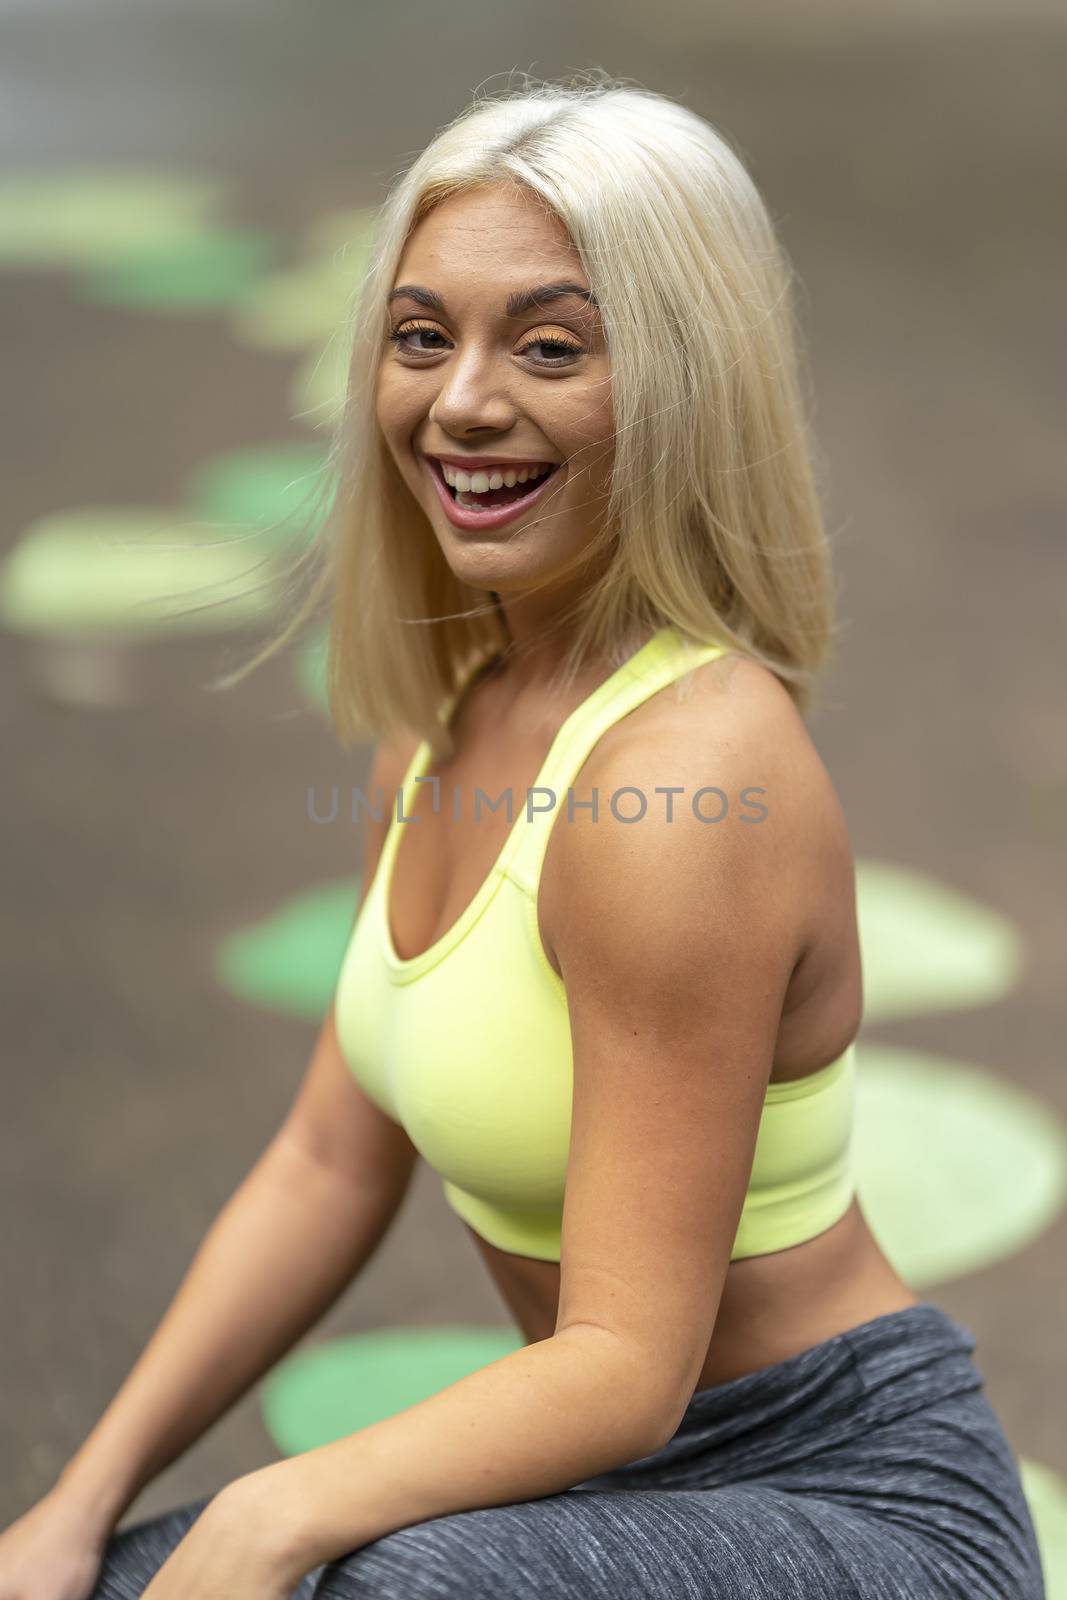 A gorgeous young blonde model works out outdoors while enjoying a summers day